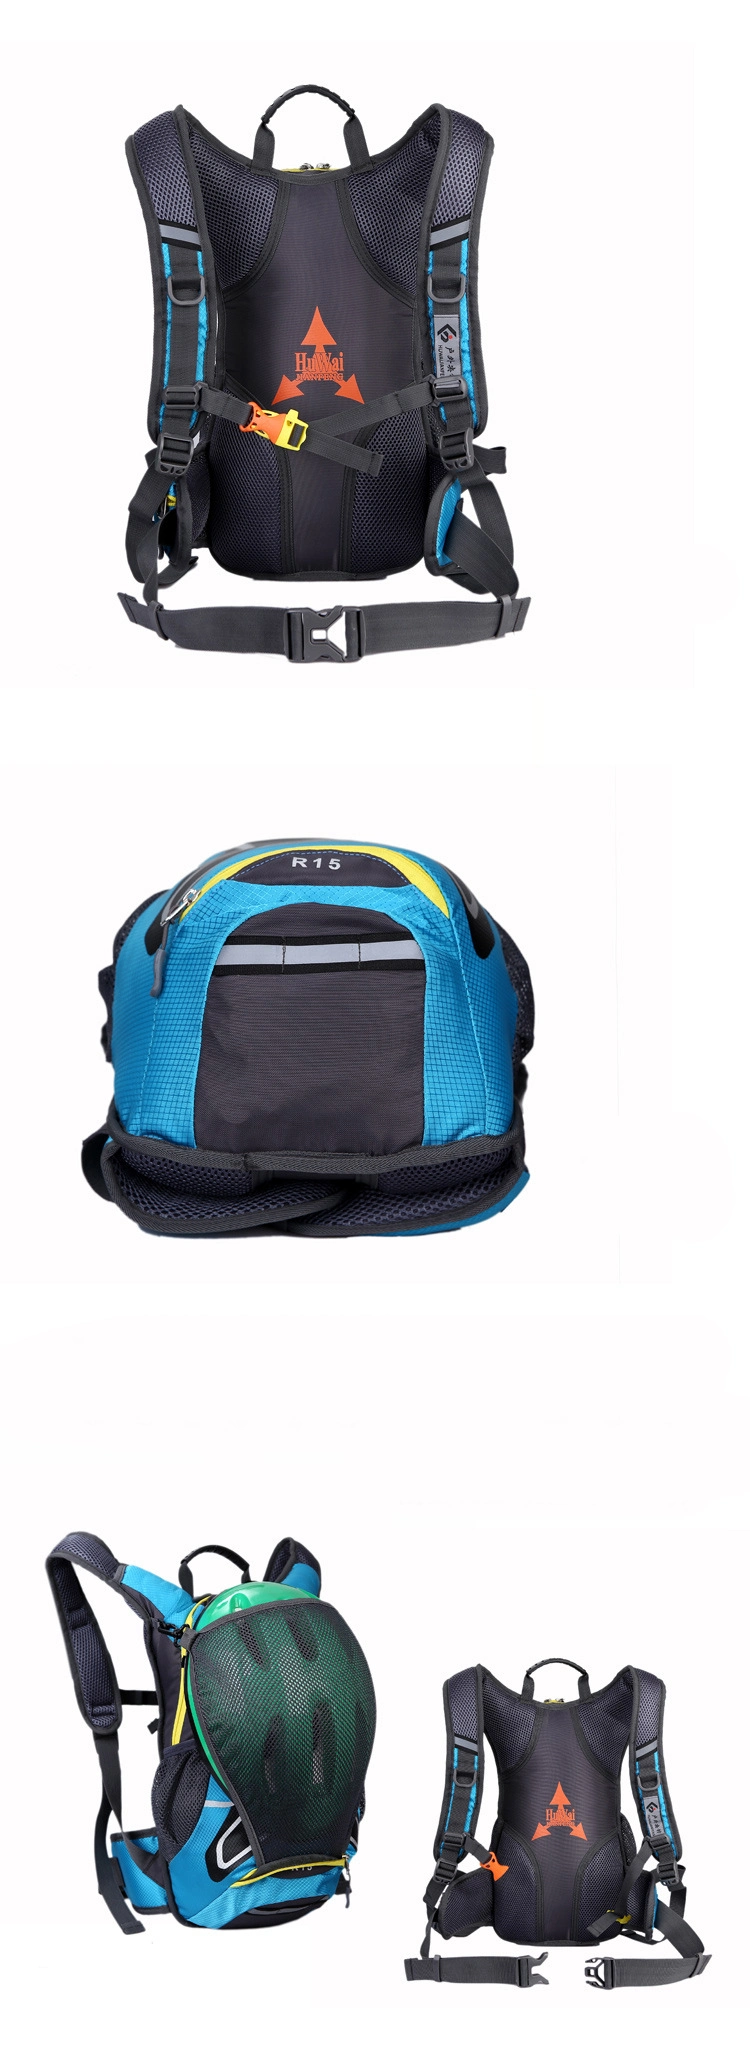 Backpack Riding Backpack with Basketball Net Bicycle Outdoor Travel Hydration Bag Riding Bag